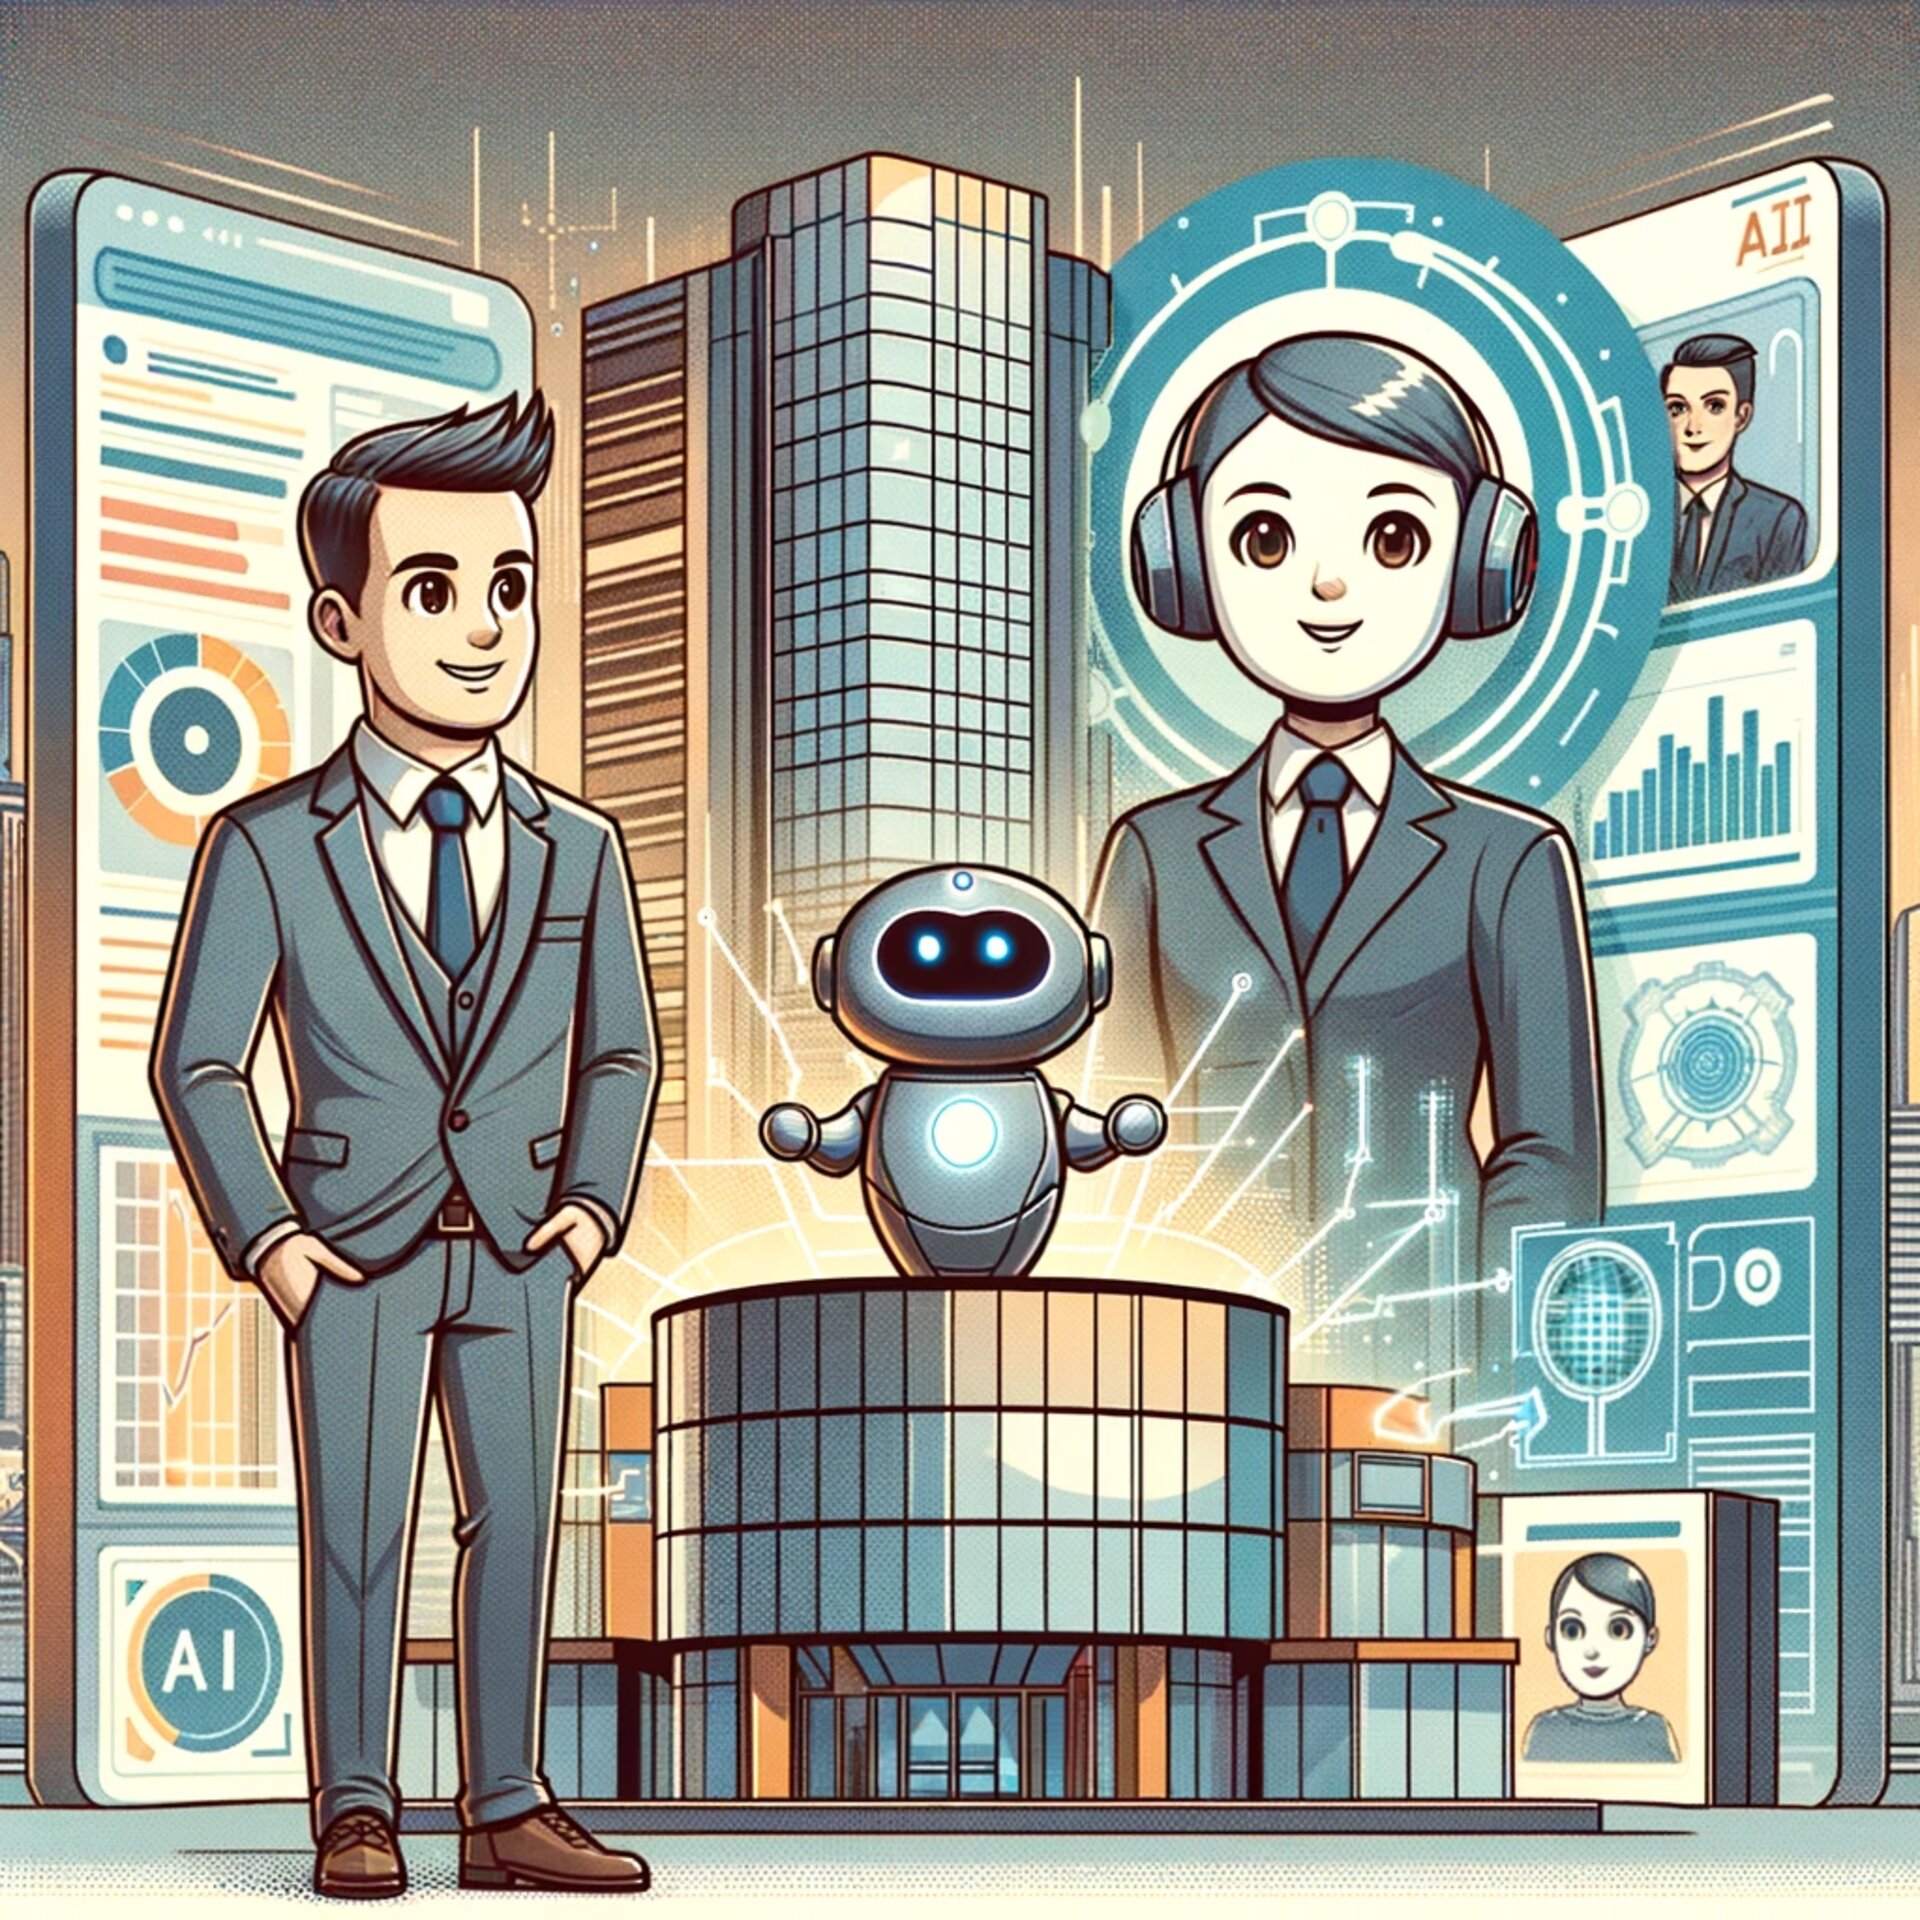 CEO with an AI assistant